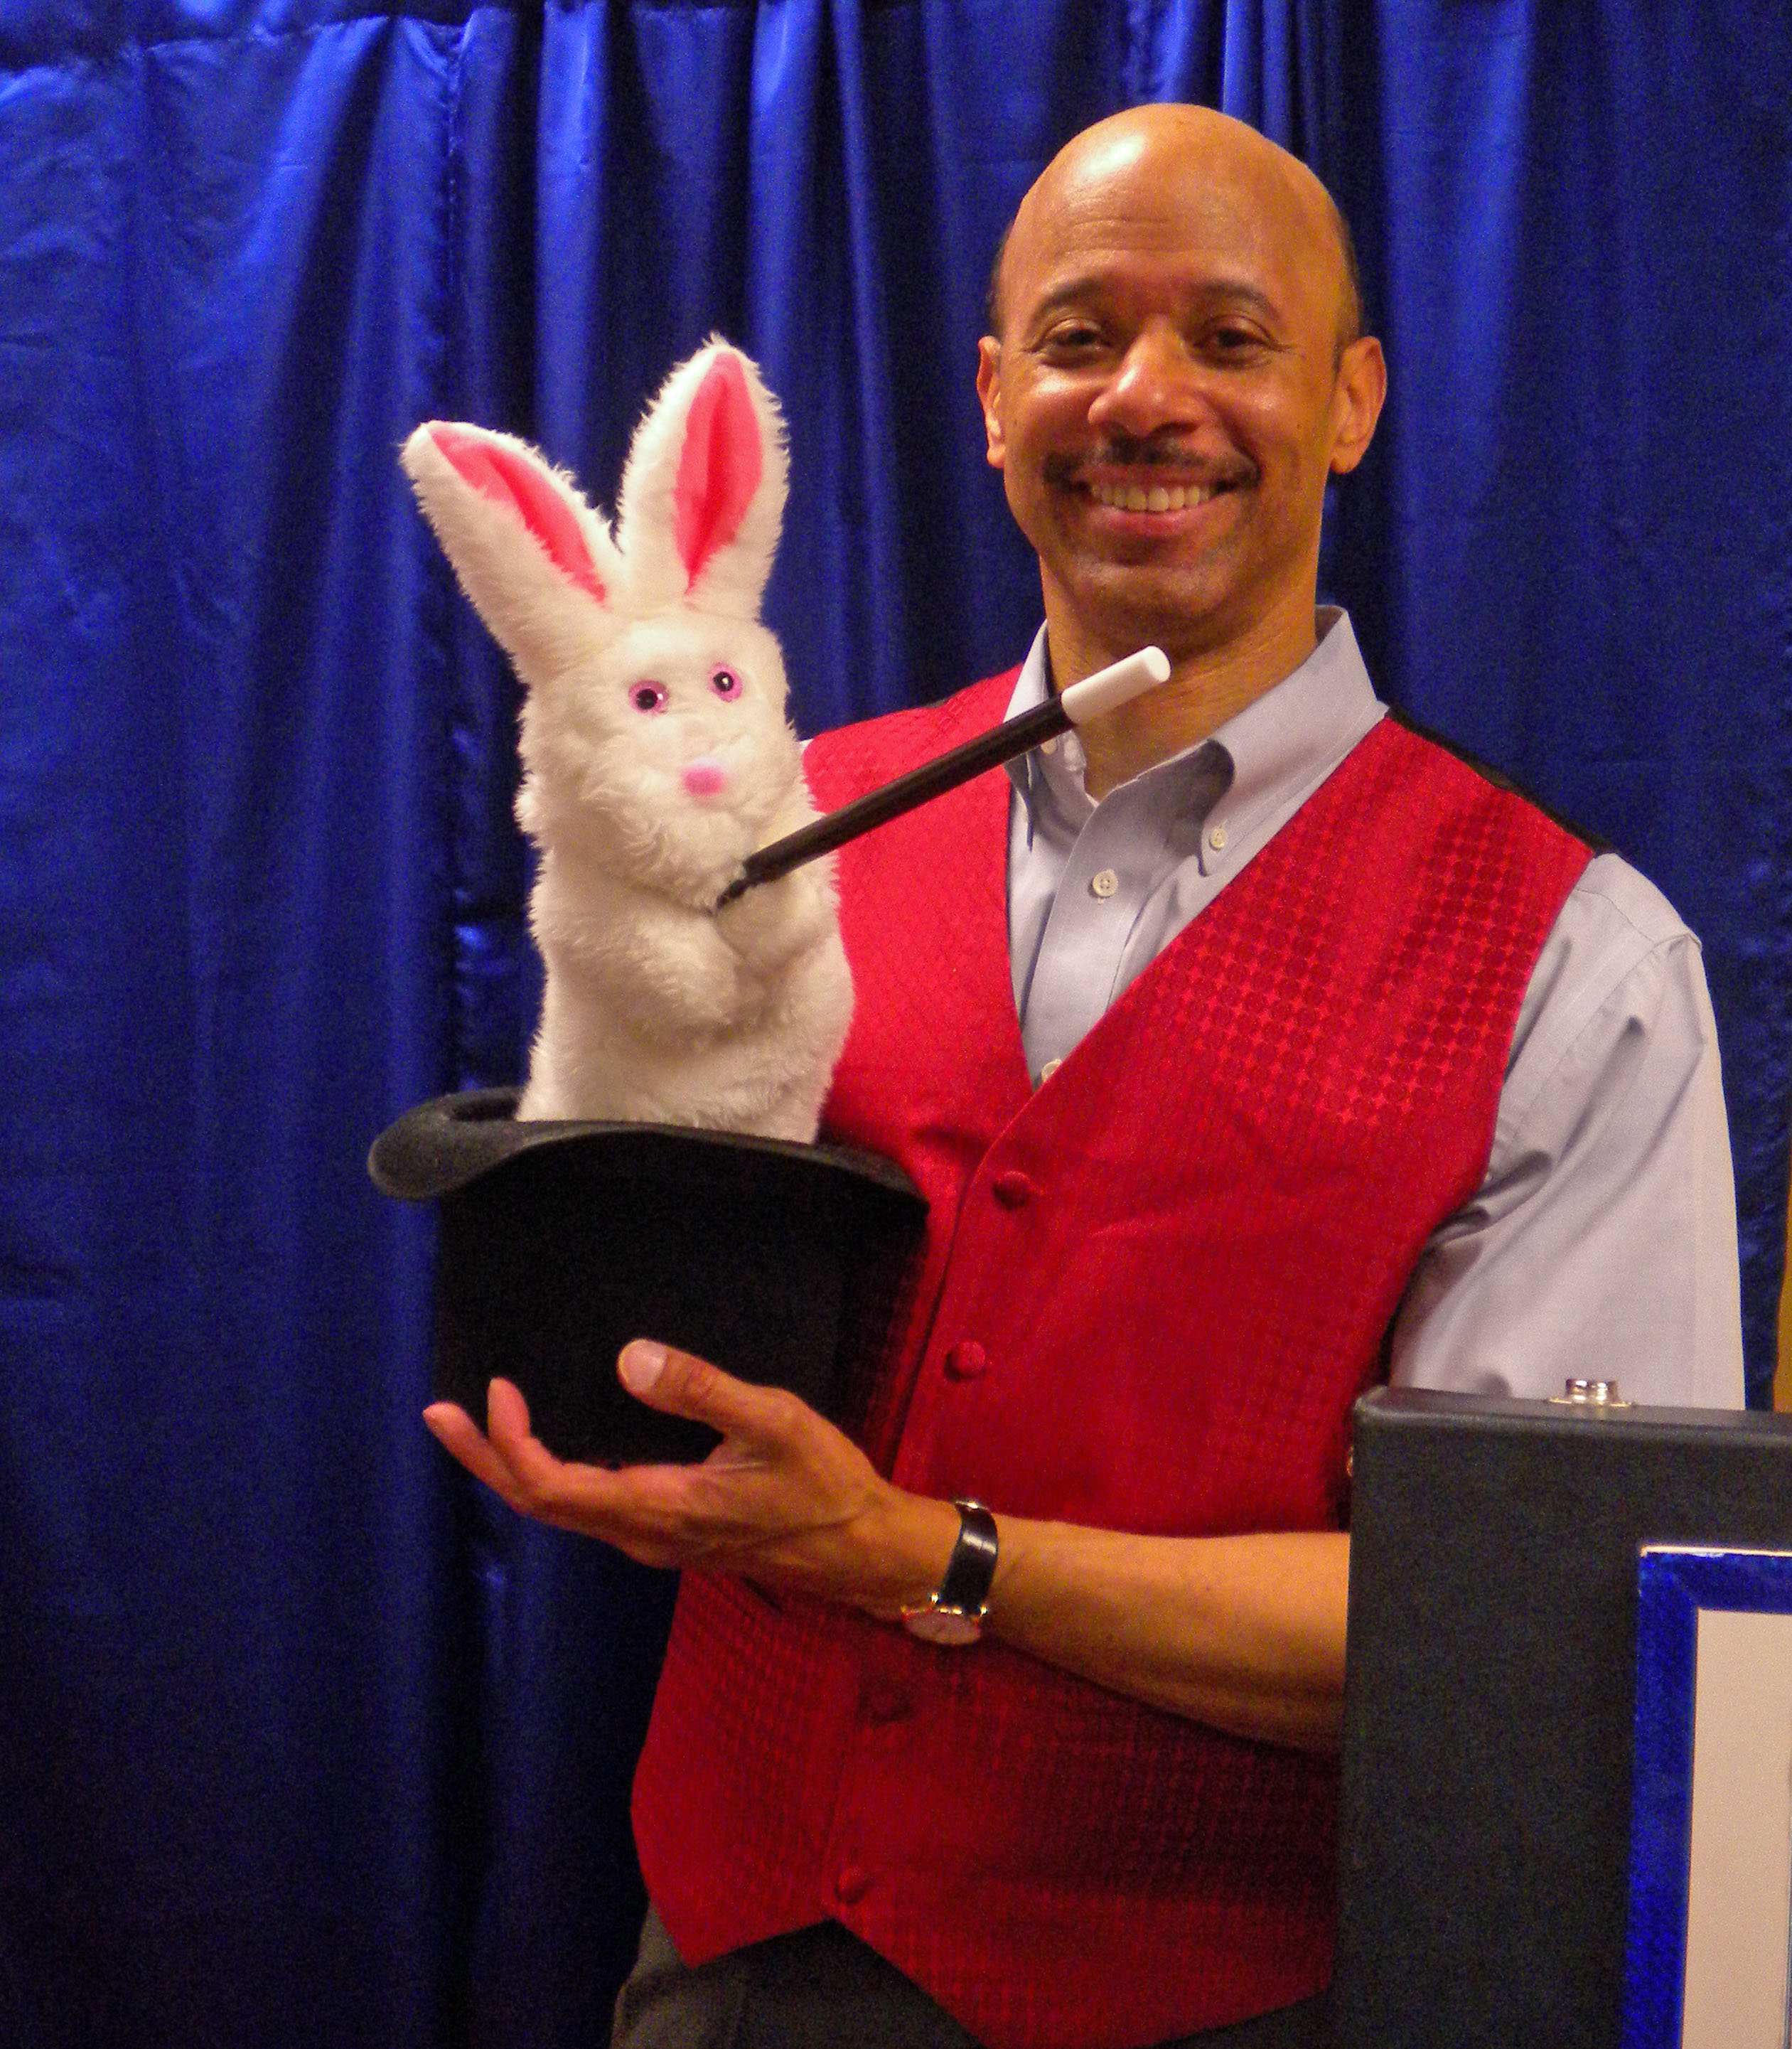 Morris in a red vest holding a rabbit in a top hat